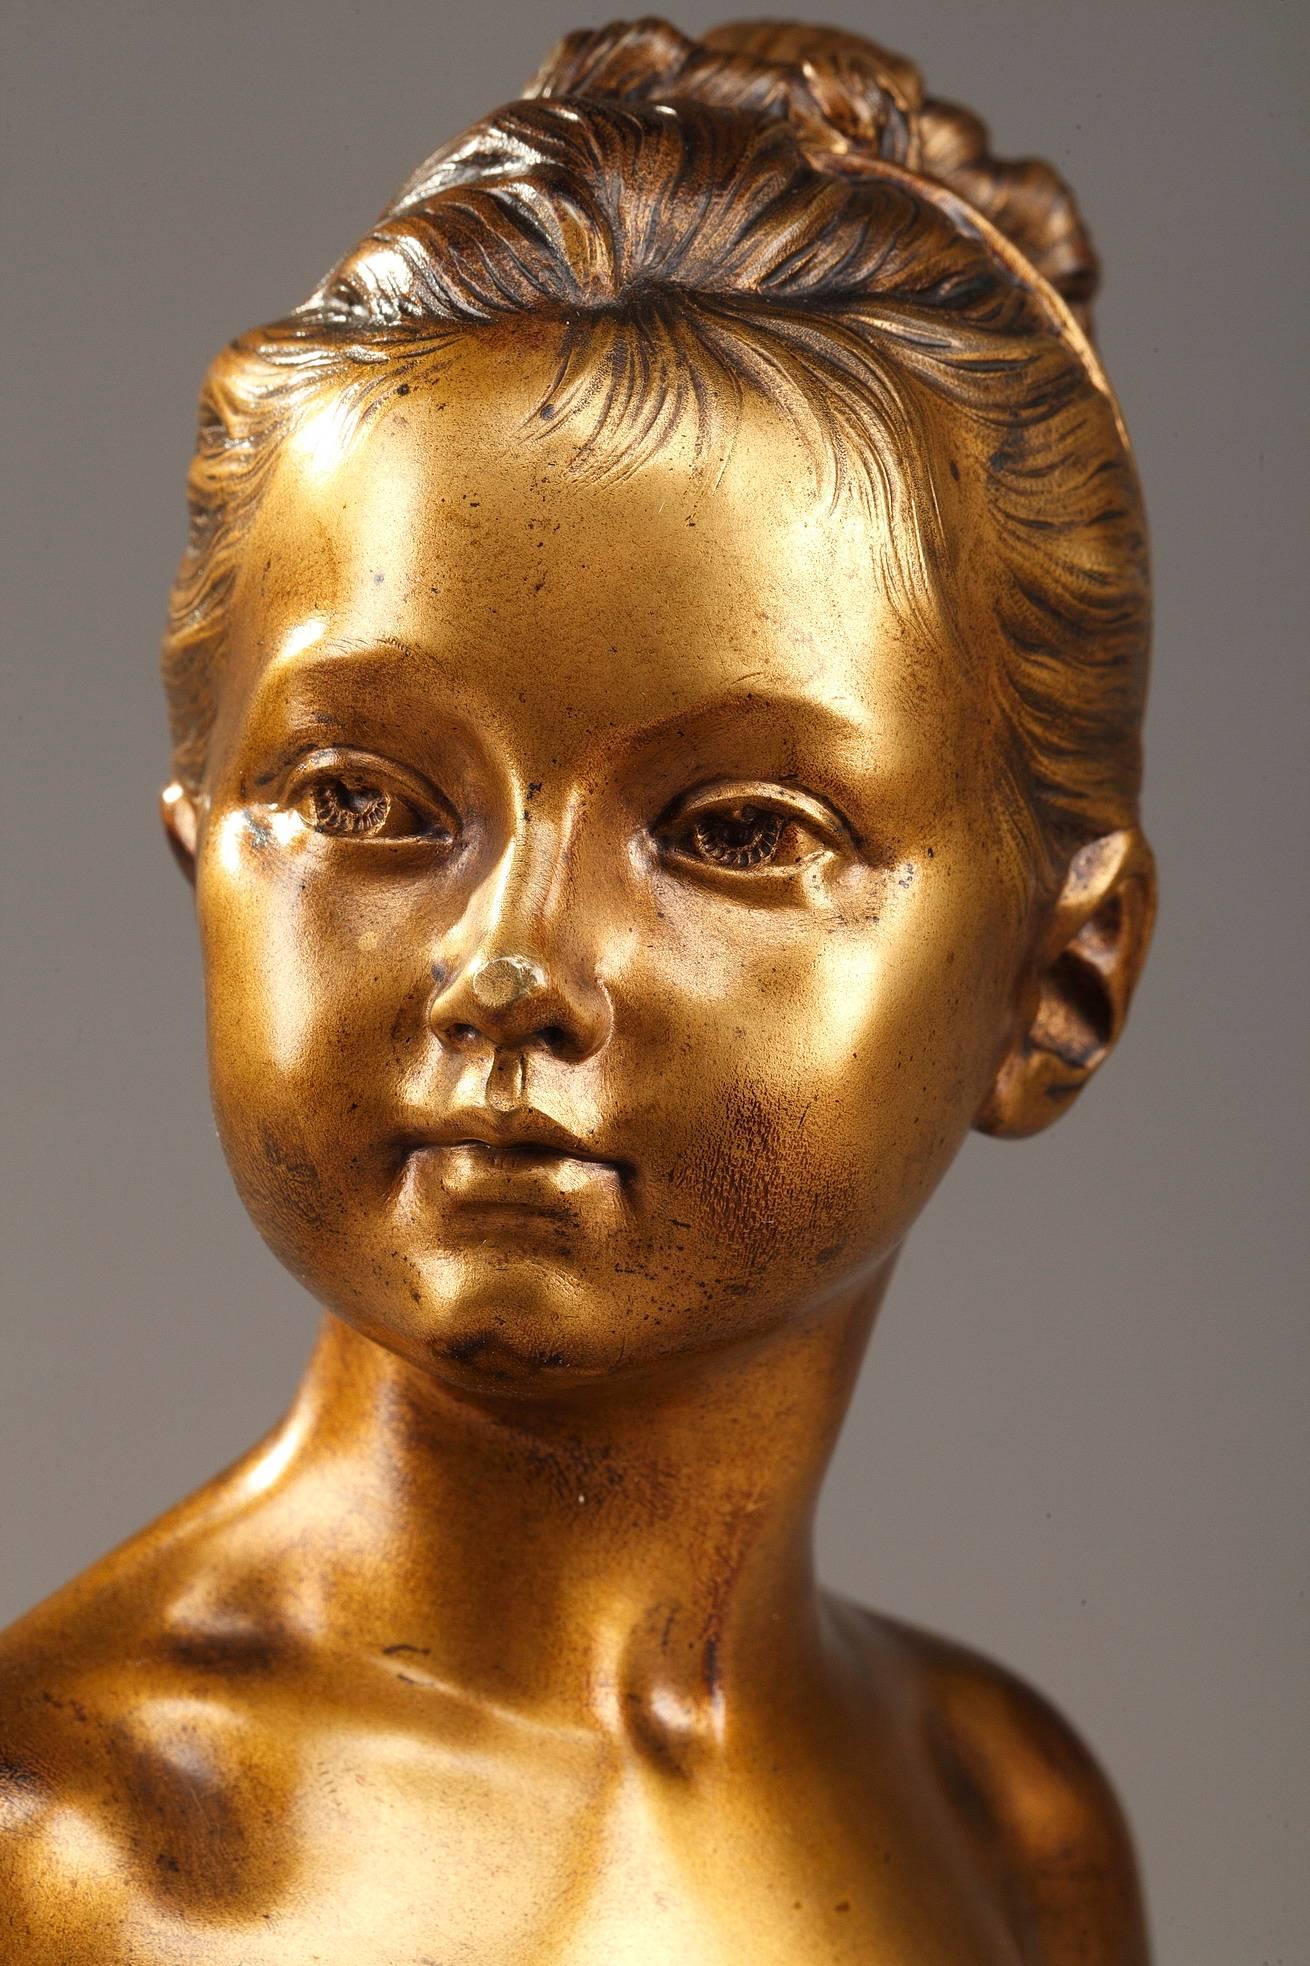 This small bust in bronze with gold patina derives from a masterpiece of children's portraiture by Jean-Antoine Houdon: the 